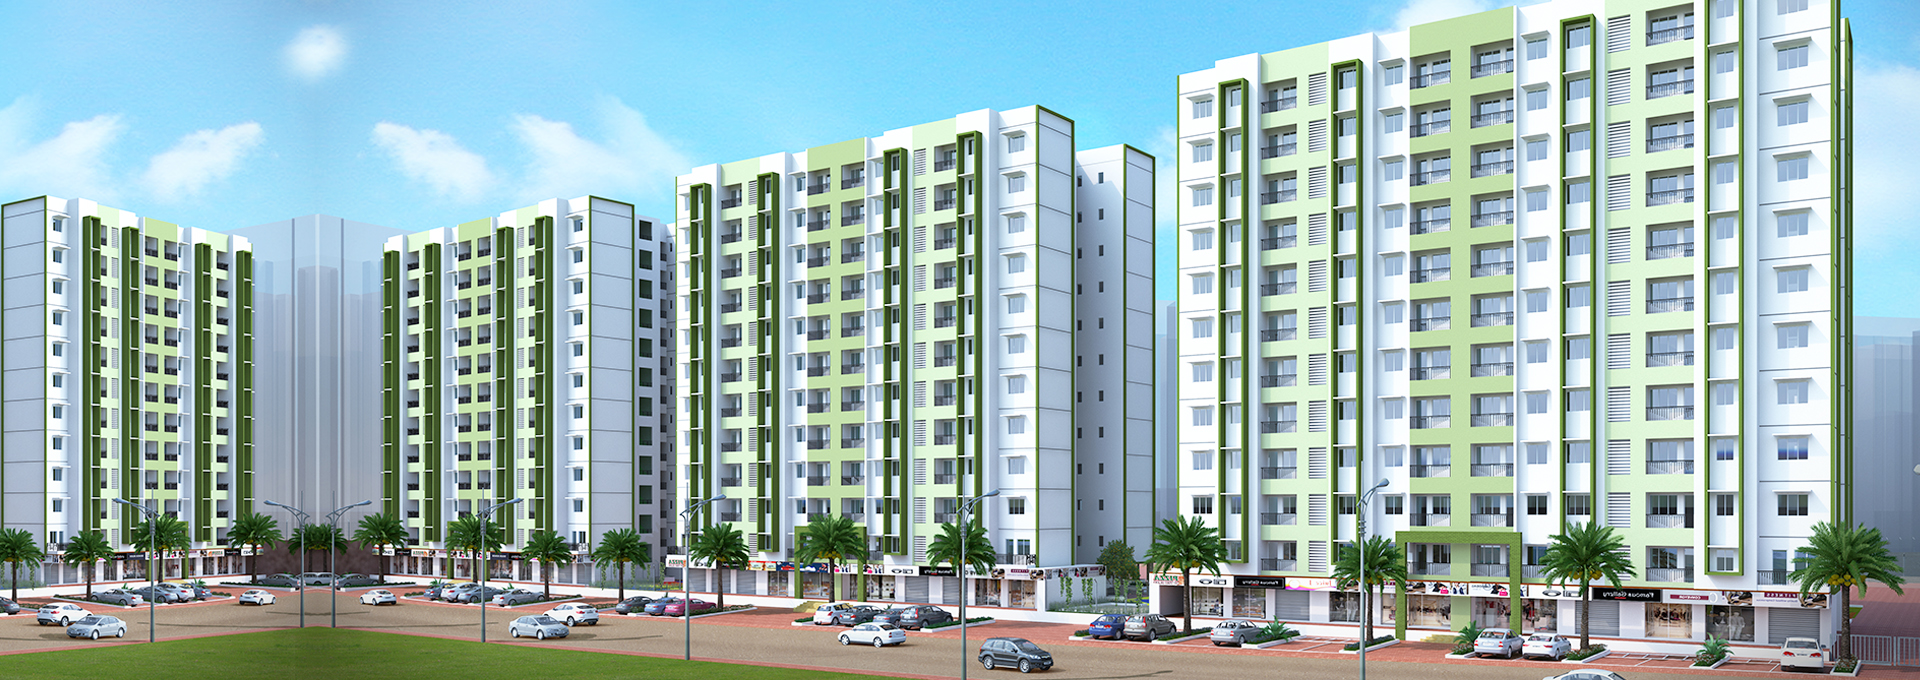 Luxury Apartments, Flats in Chakan, Pune